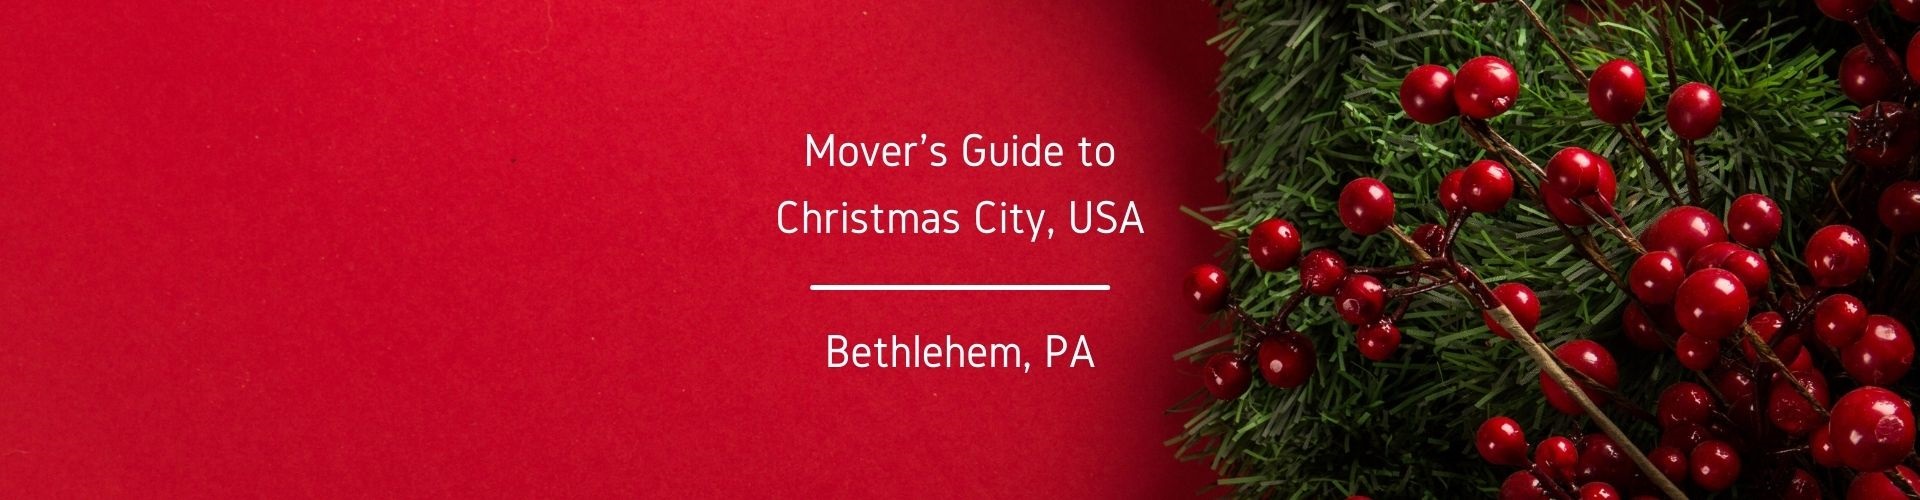 Mover's Guide to Bethlehem PA